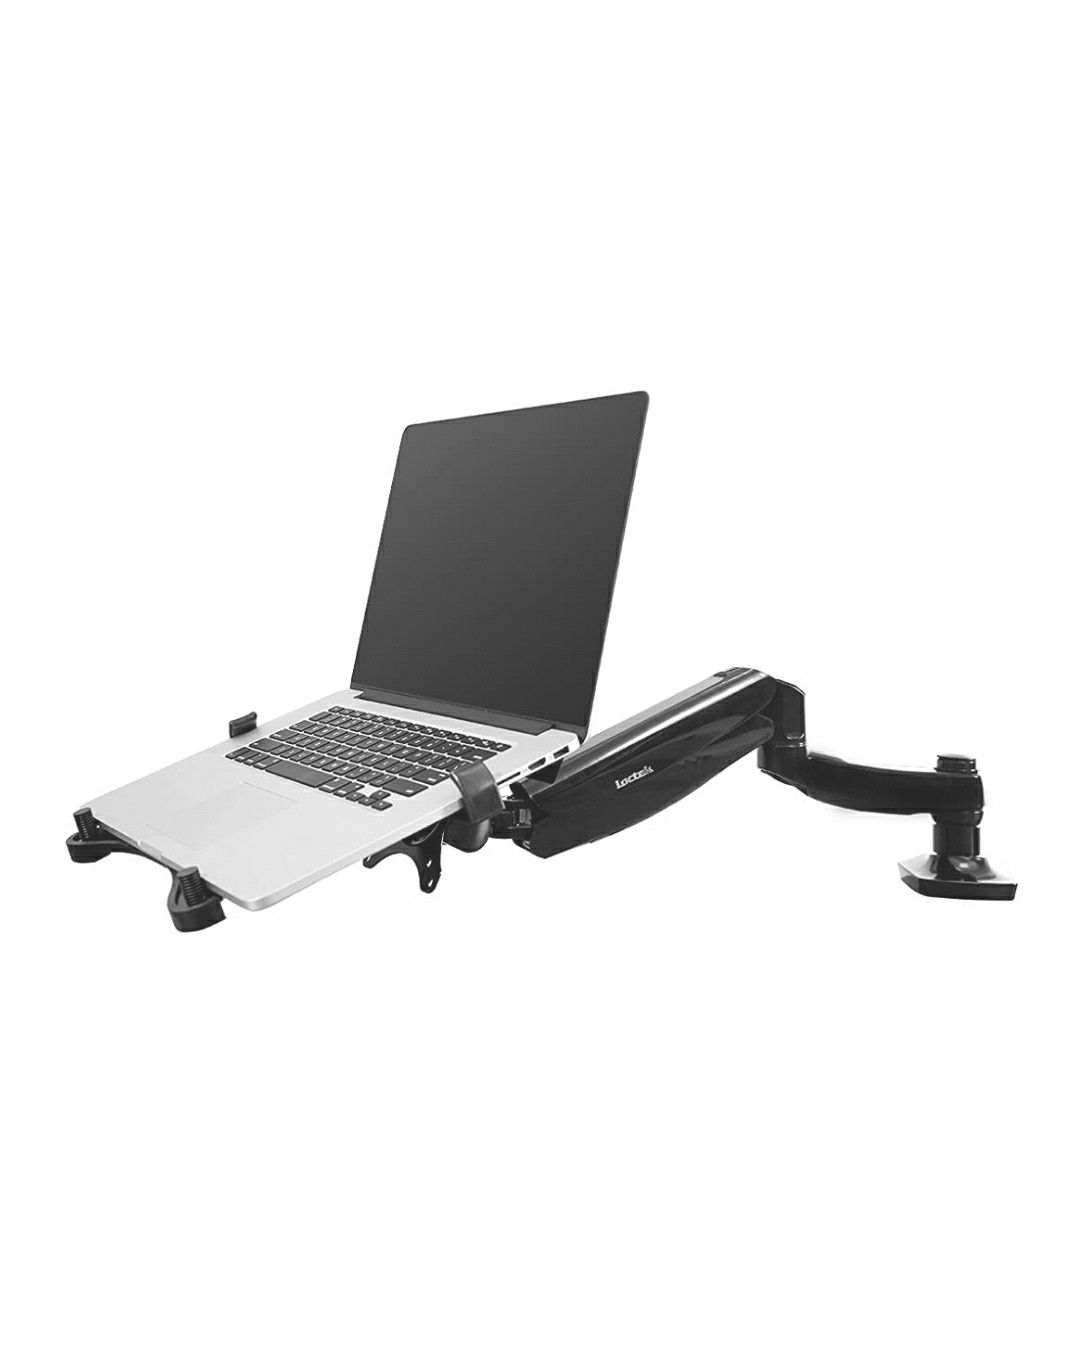 FLEXIMOUNTS 2-in-1 Monitor Arm Laptop Mount Stand Swivel Gas Spring